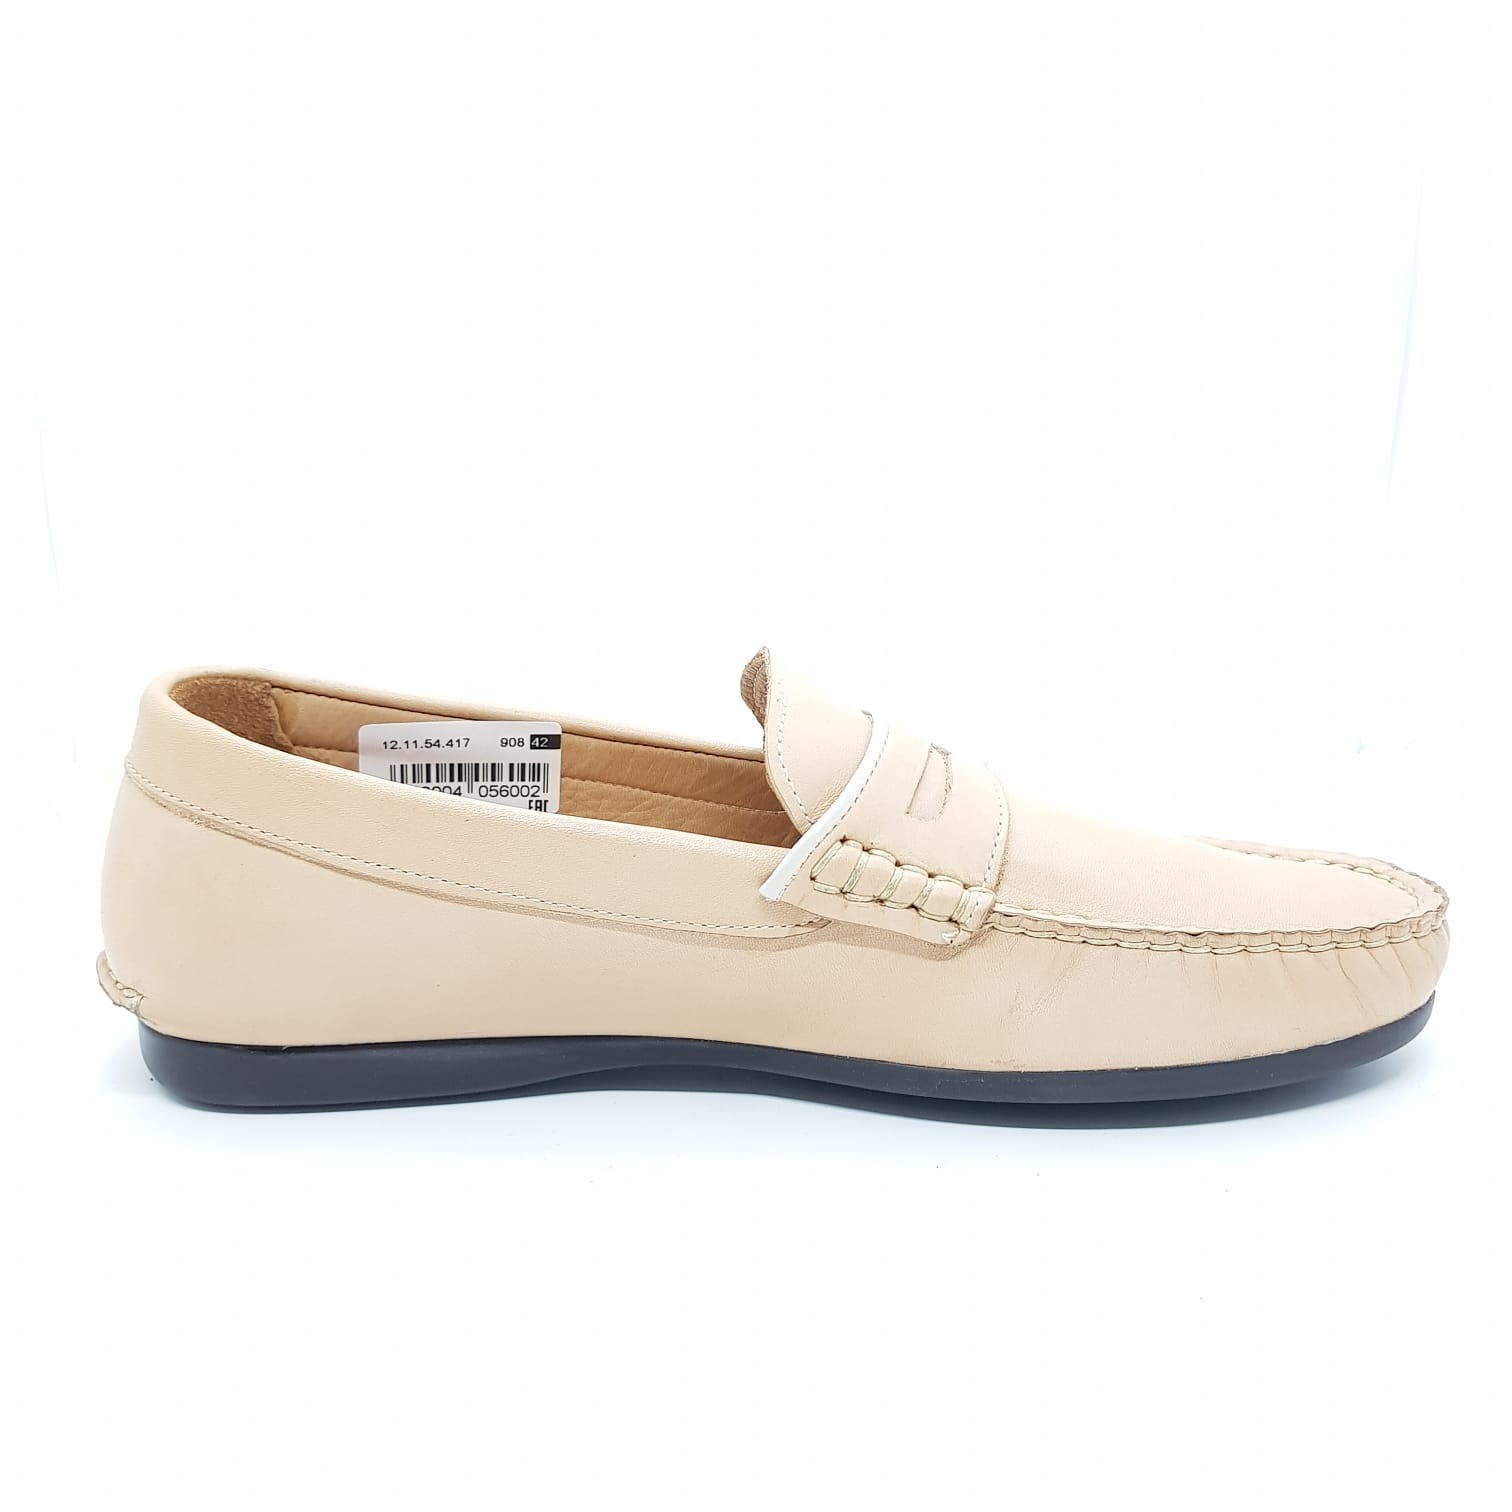 Enrico Marinelli Mens Leather Casual Loafer Cream Shoes| Telepathy ...